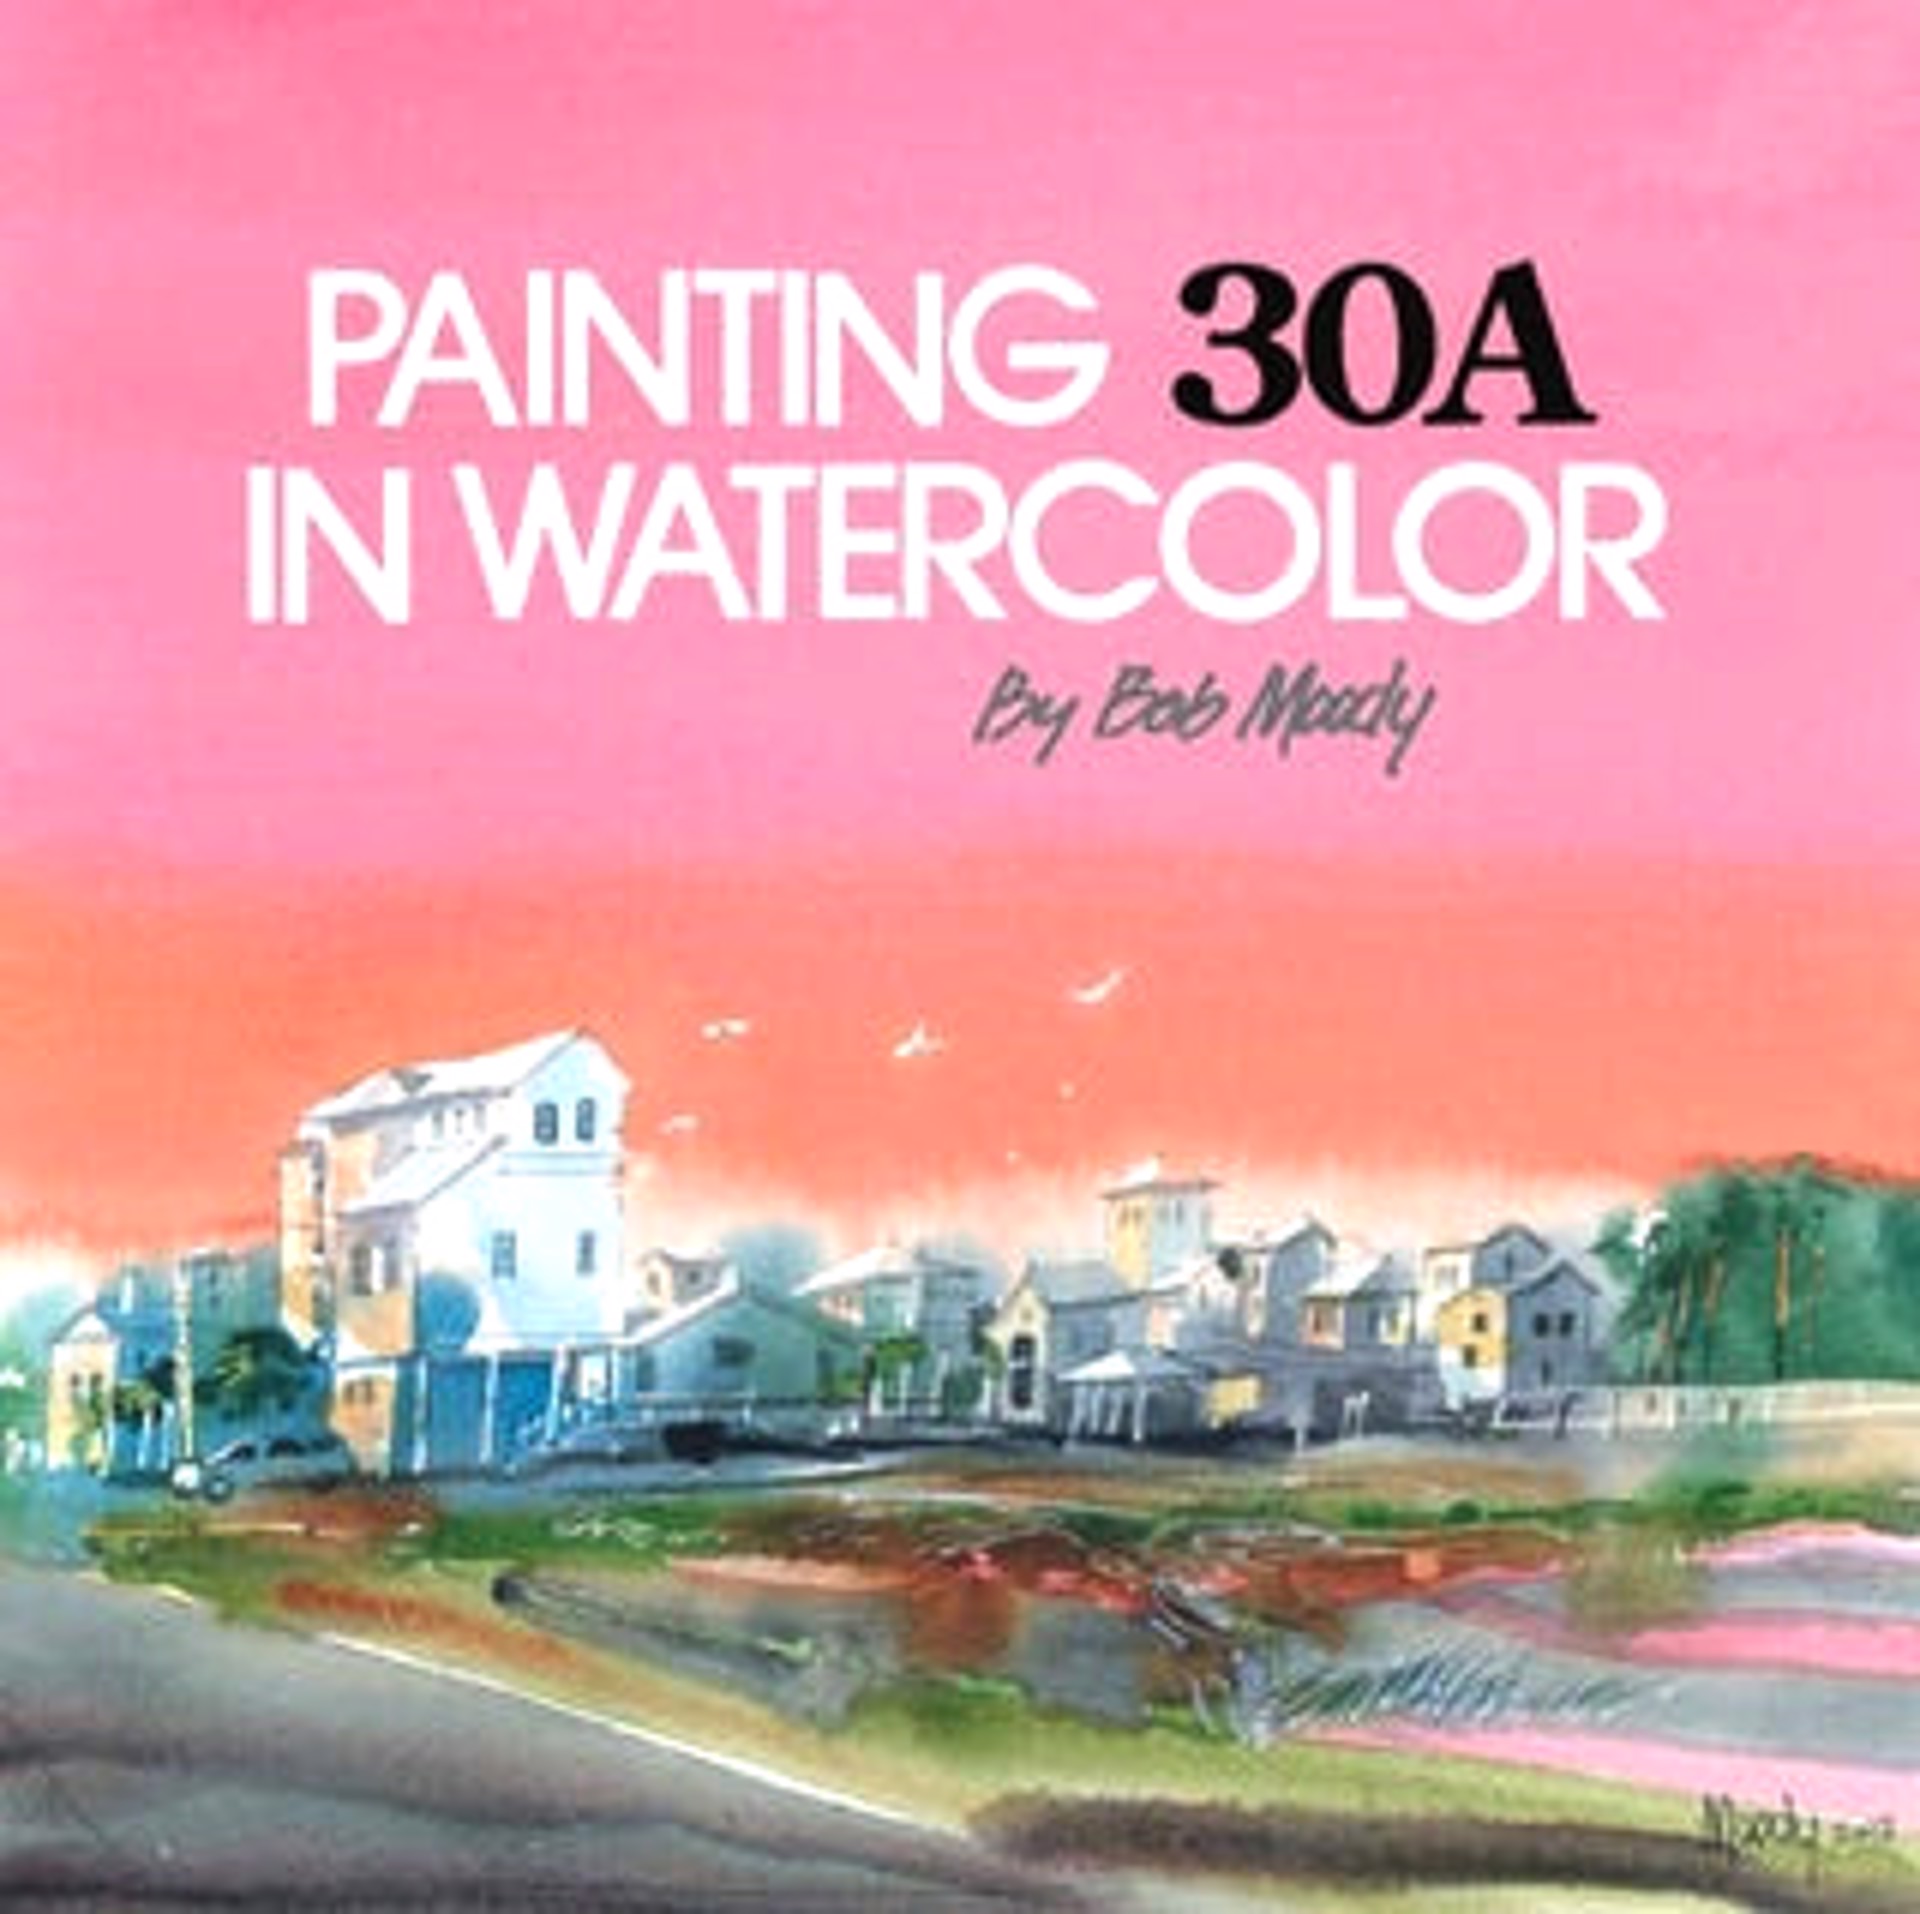 Painting 30A in Watercolor Book by Bob Moody